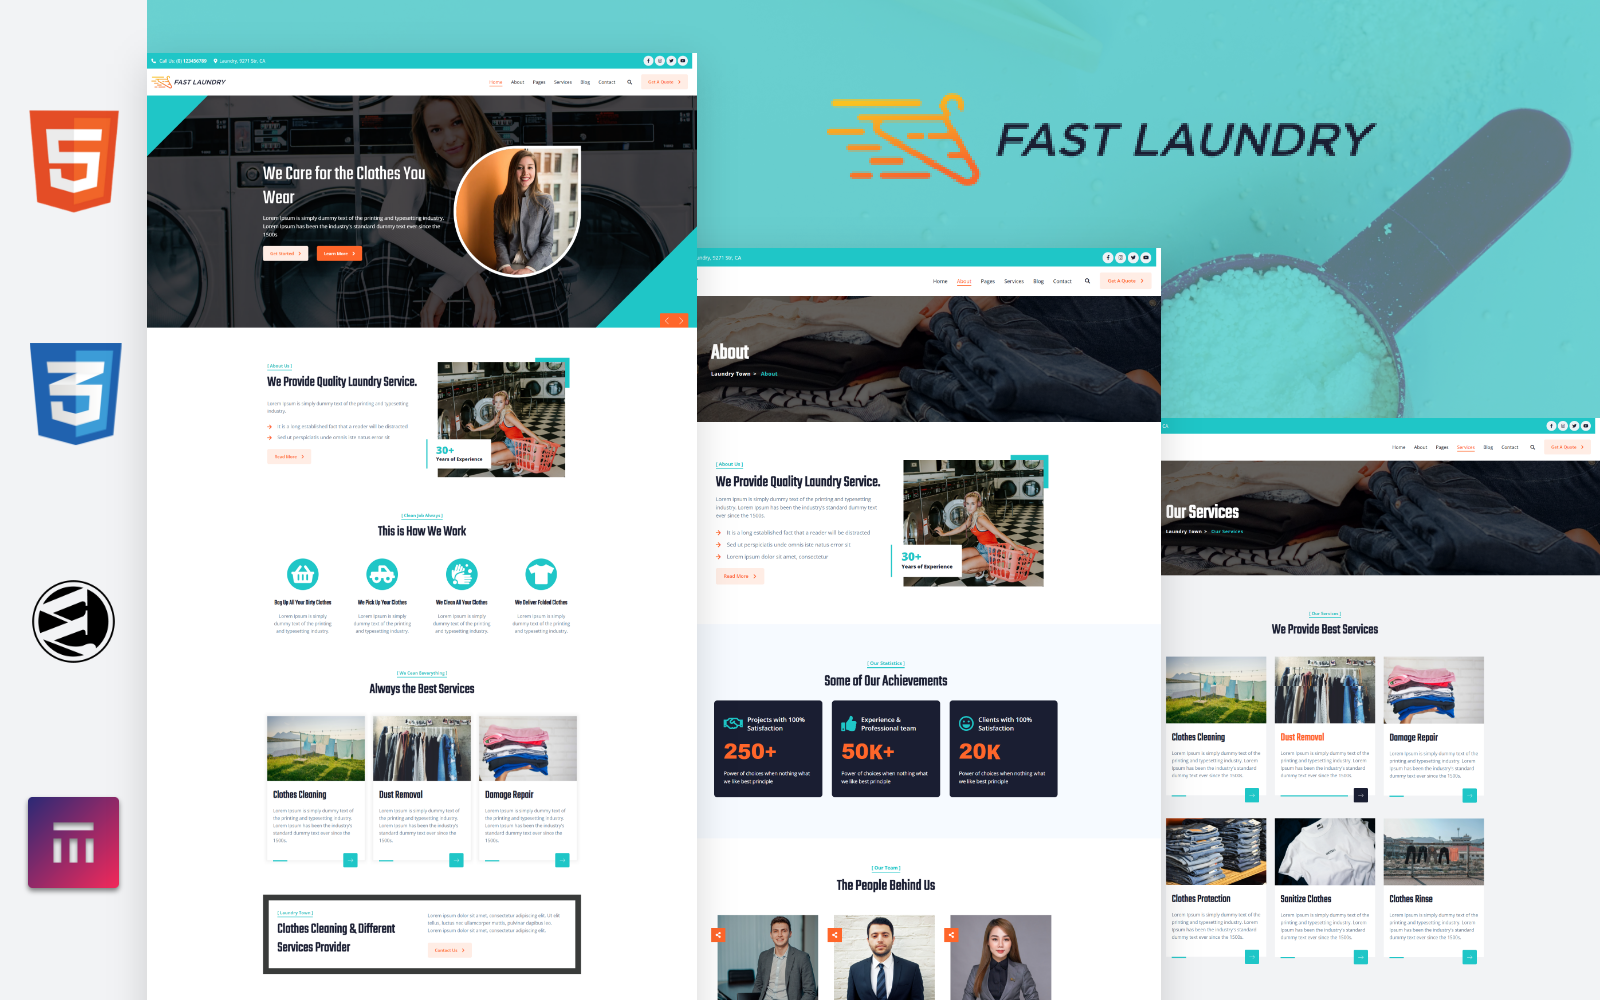 Fast Laundry - Cleaning Services WordPress Theme